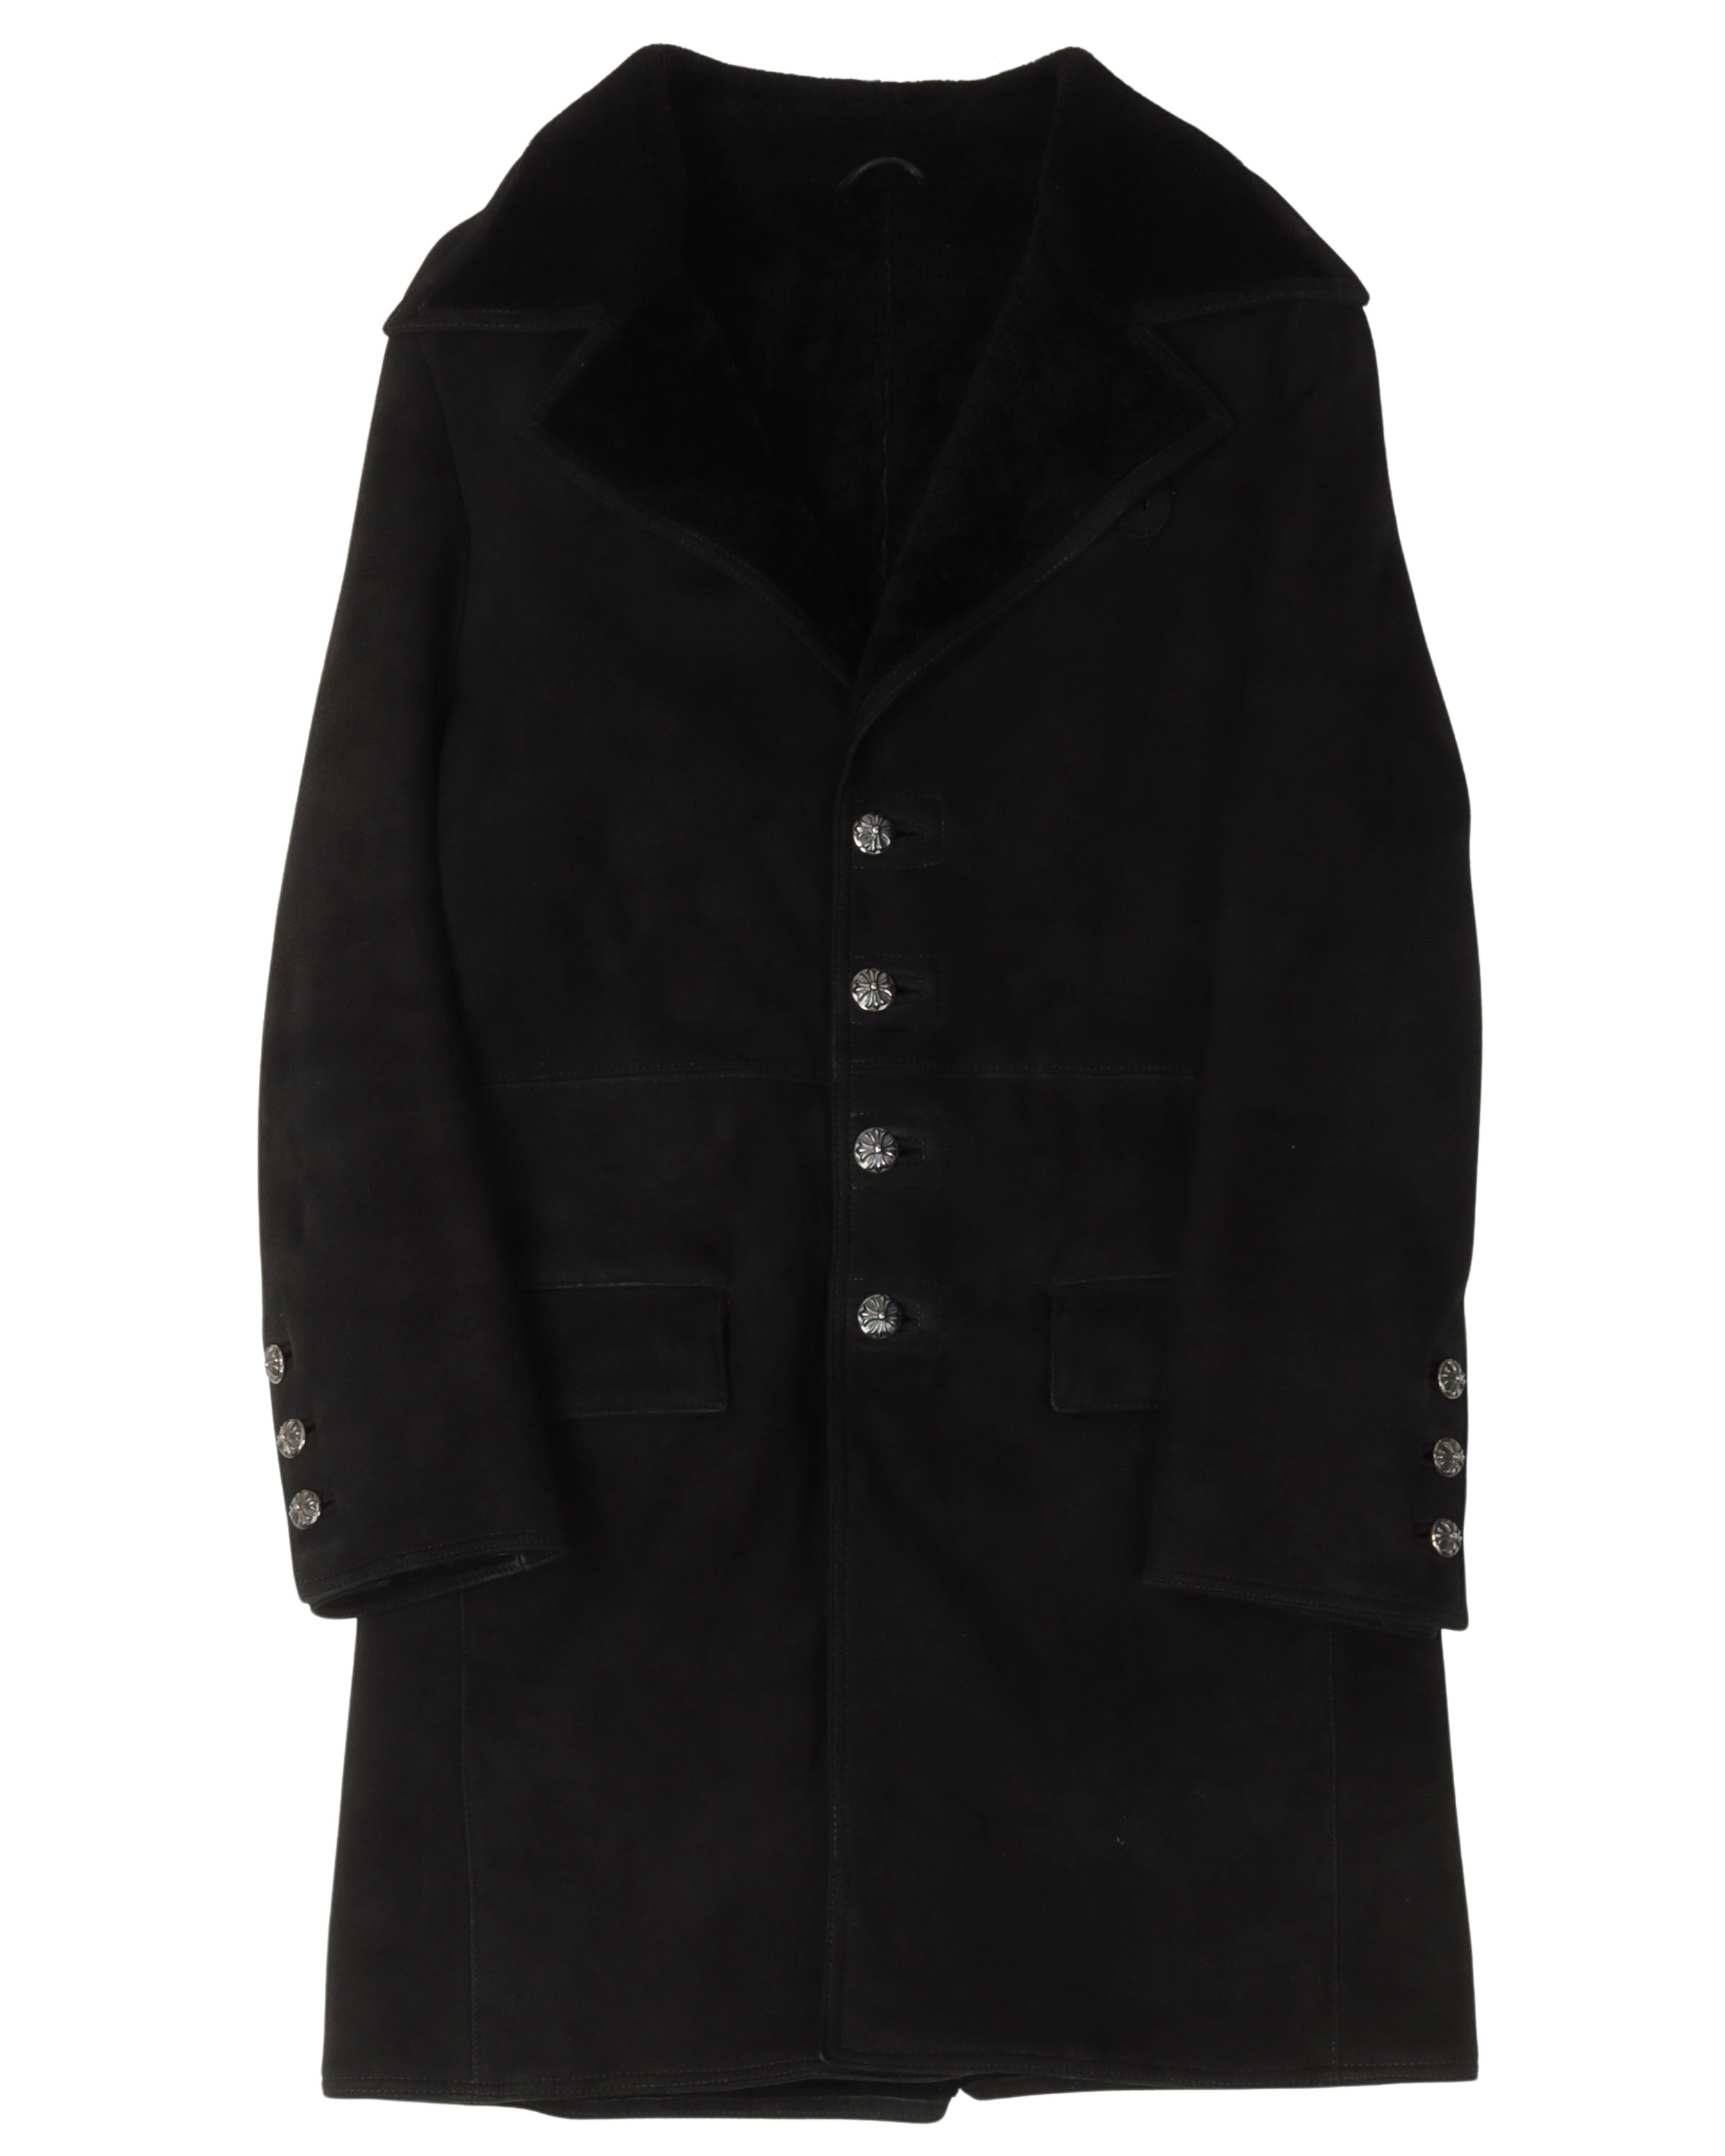 Chrome Hearts Shearling Lined Suede Leather Coat